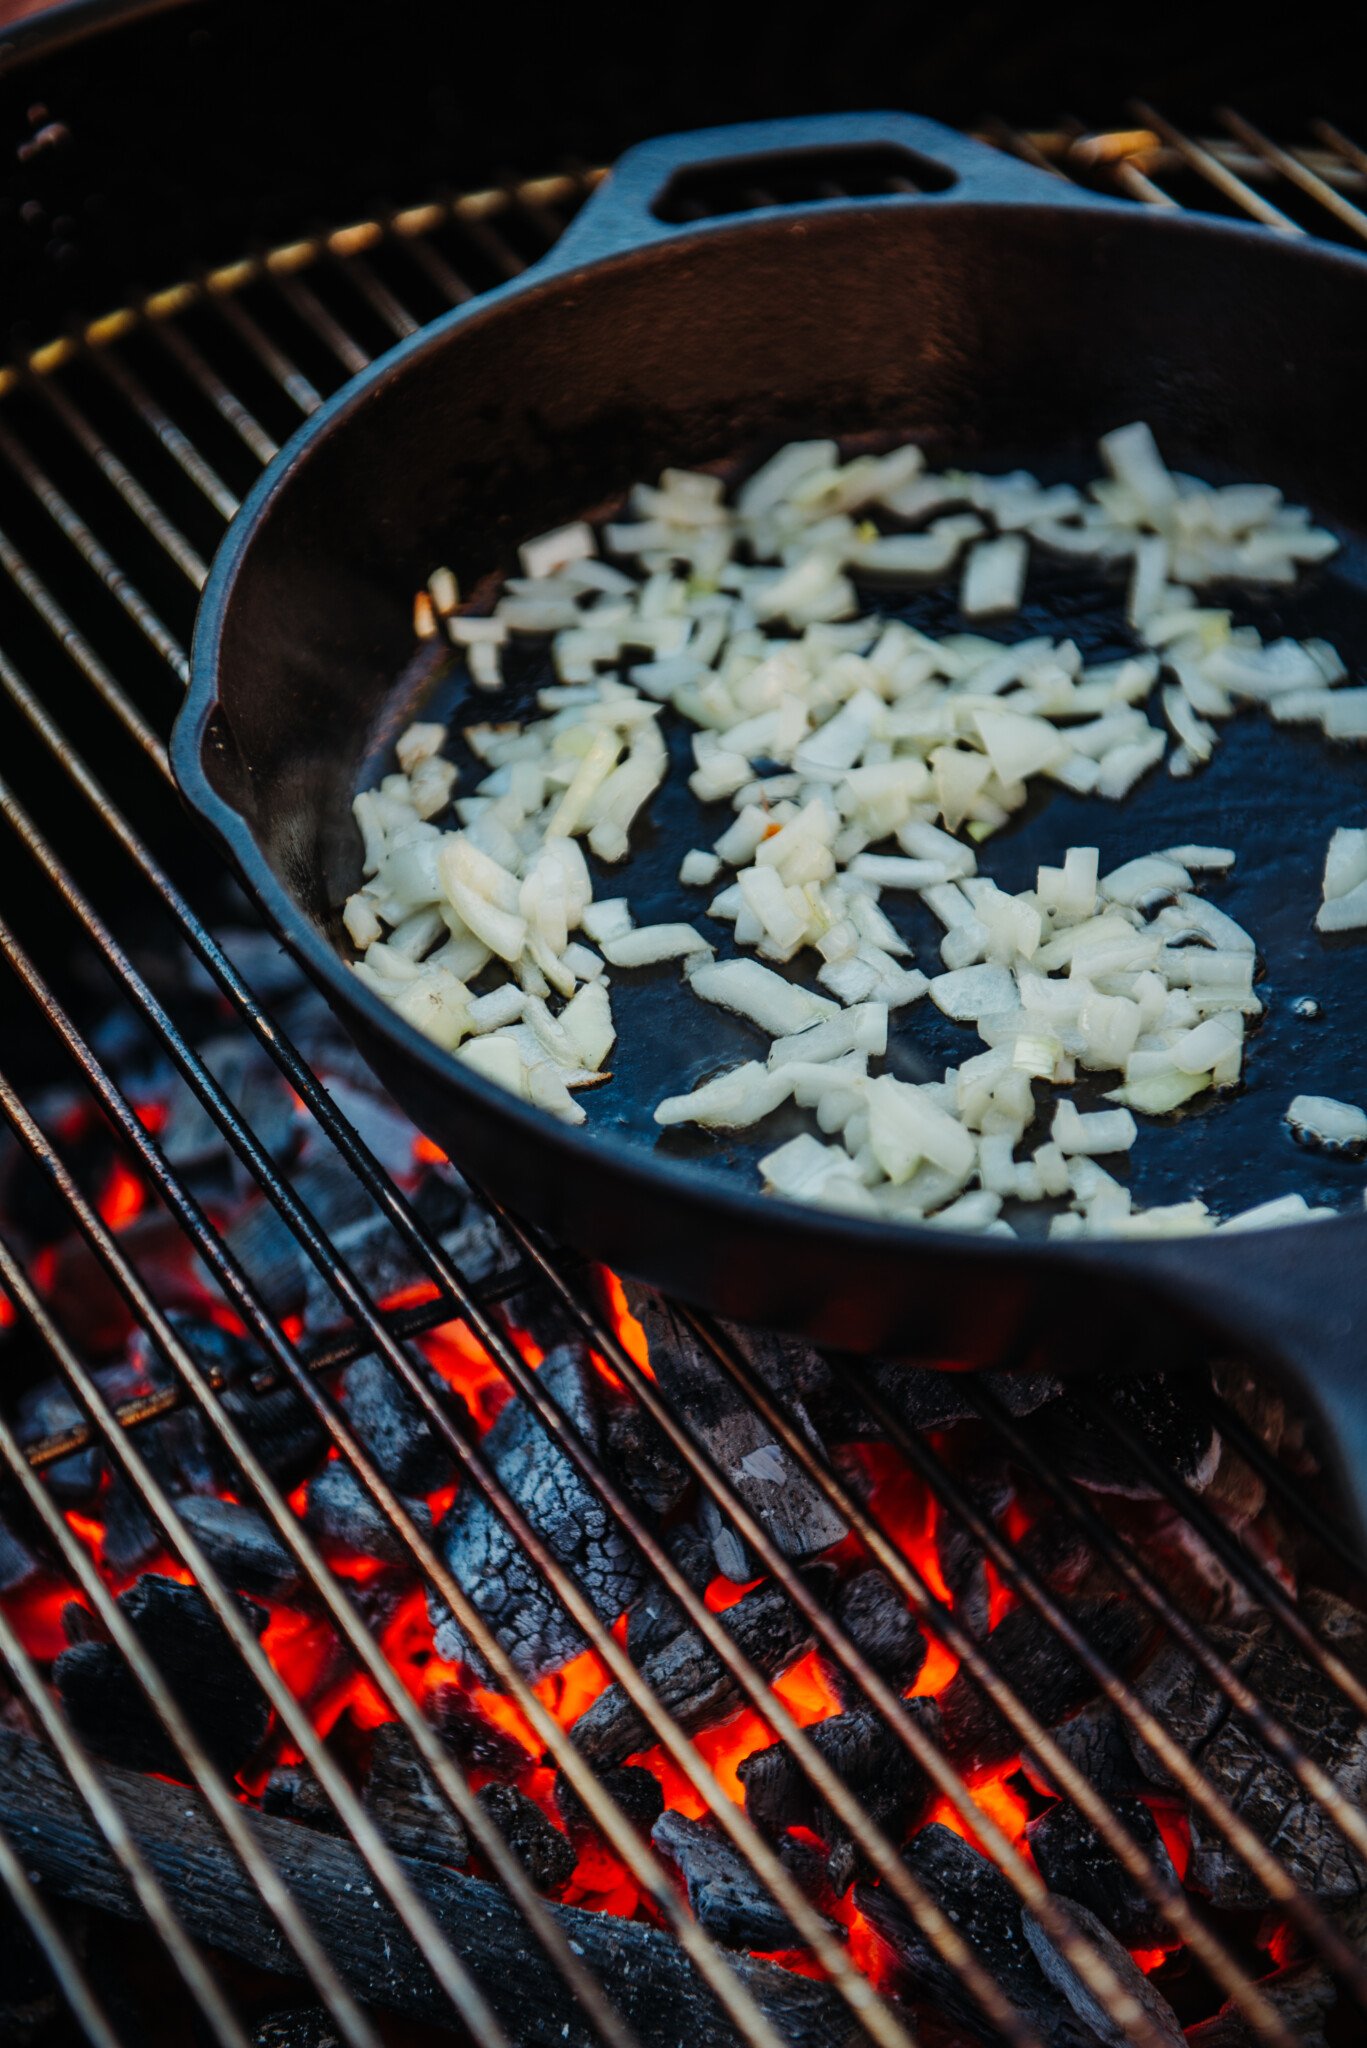 Skillet on grill with onions.